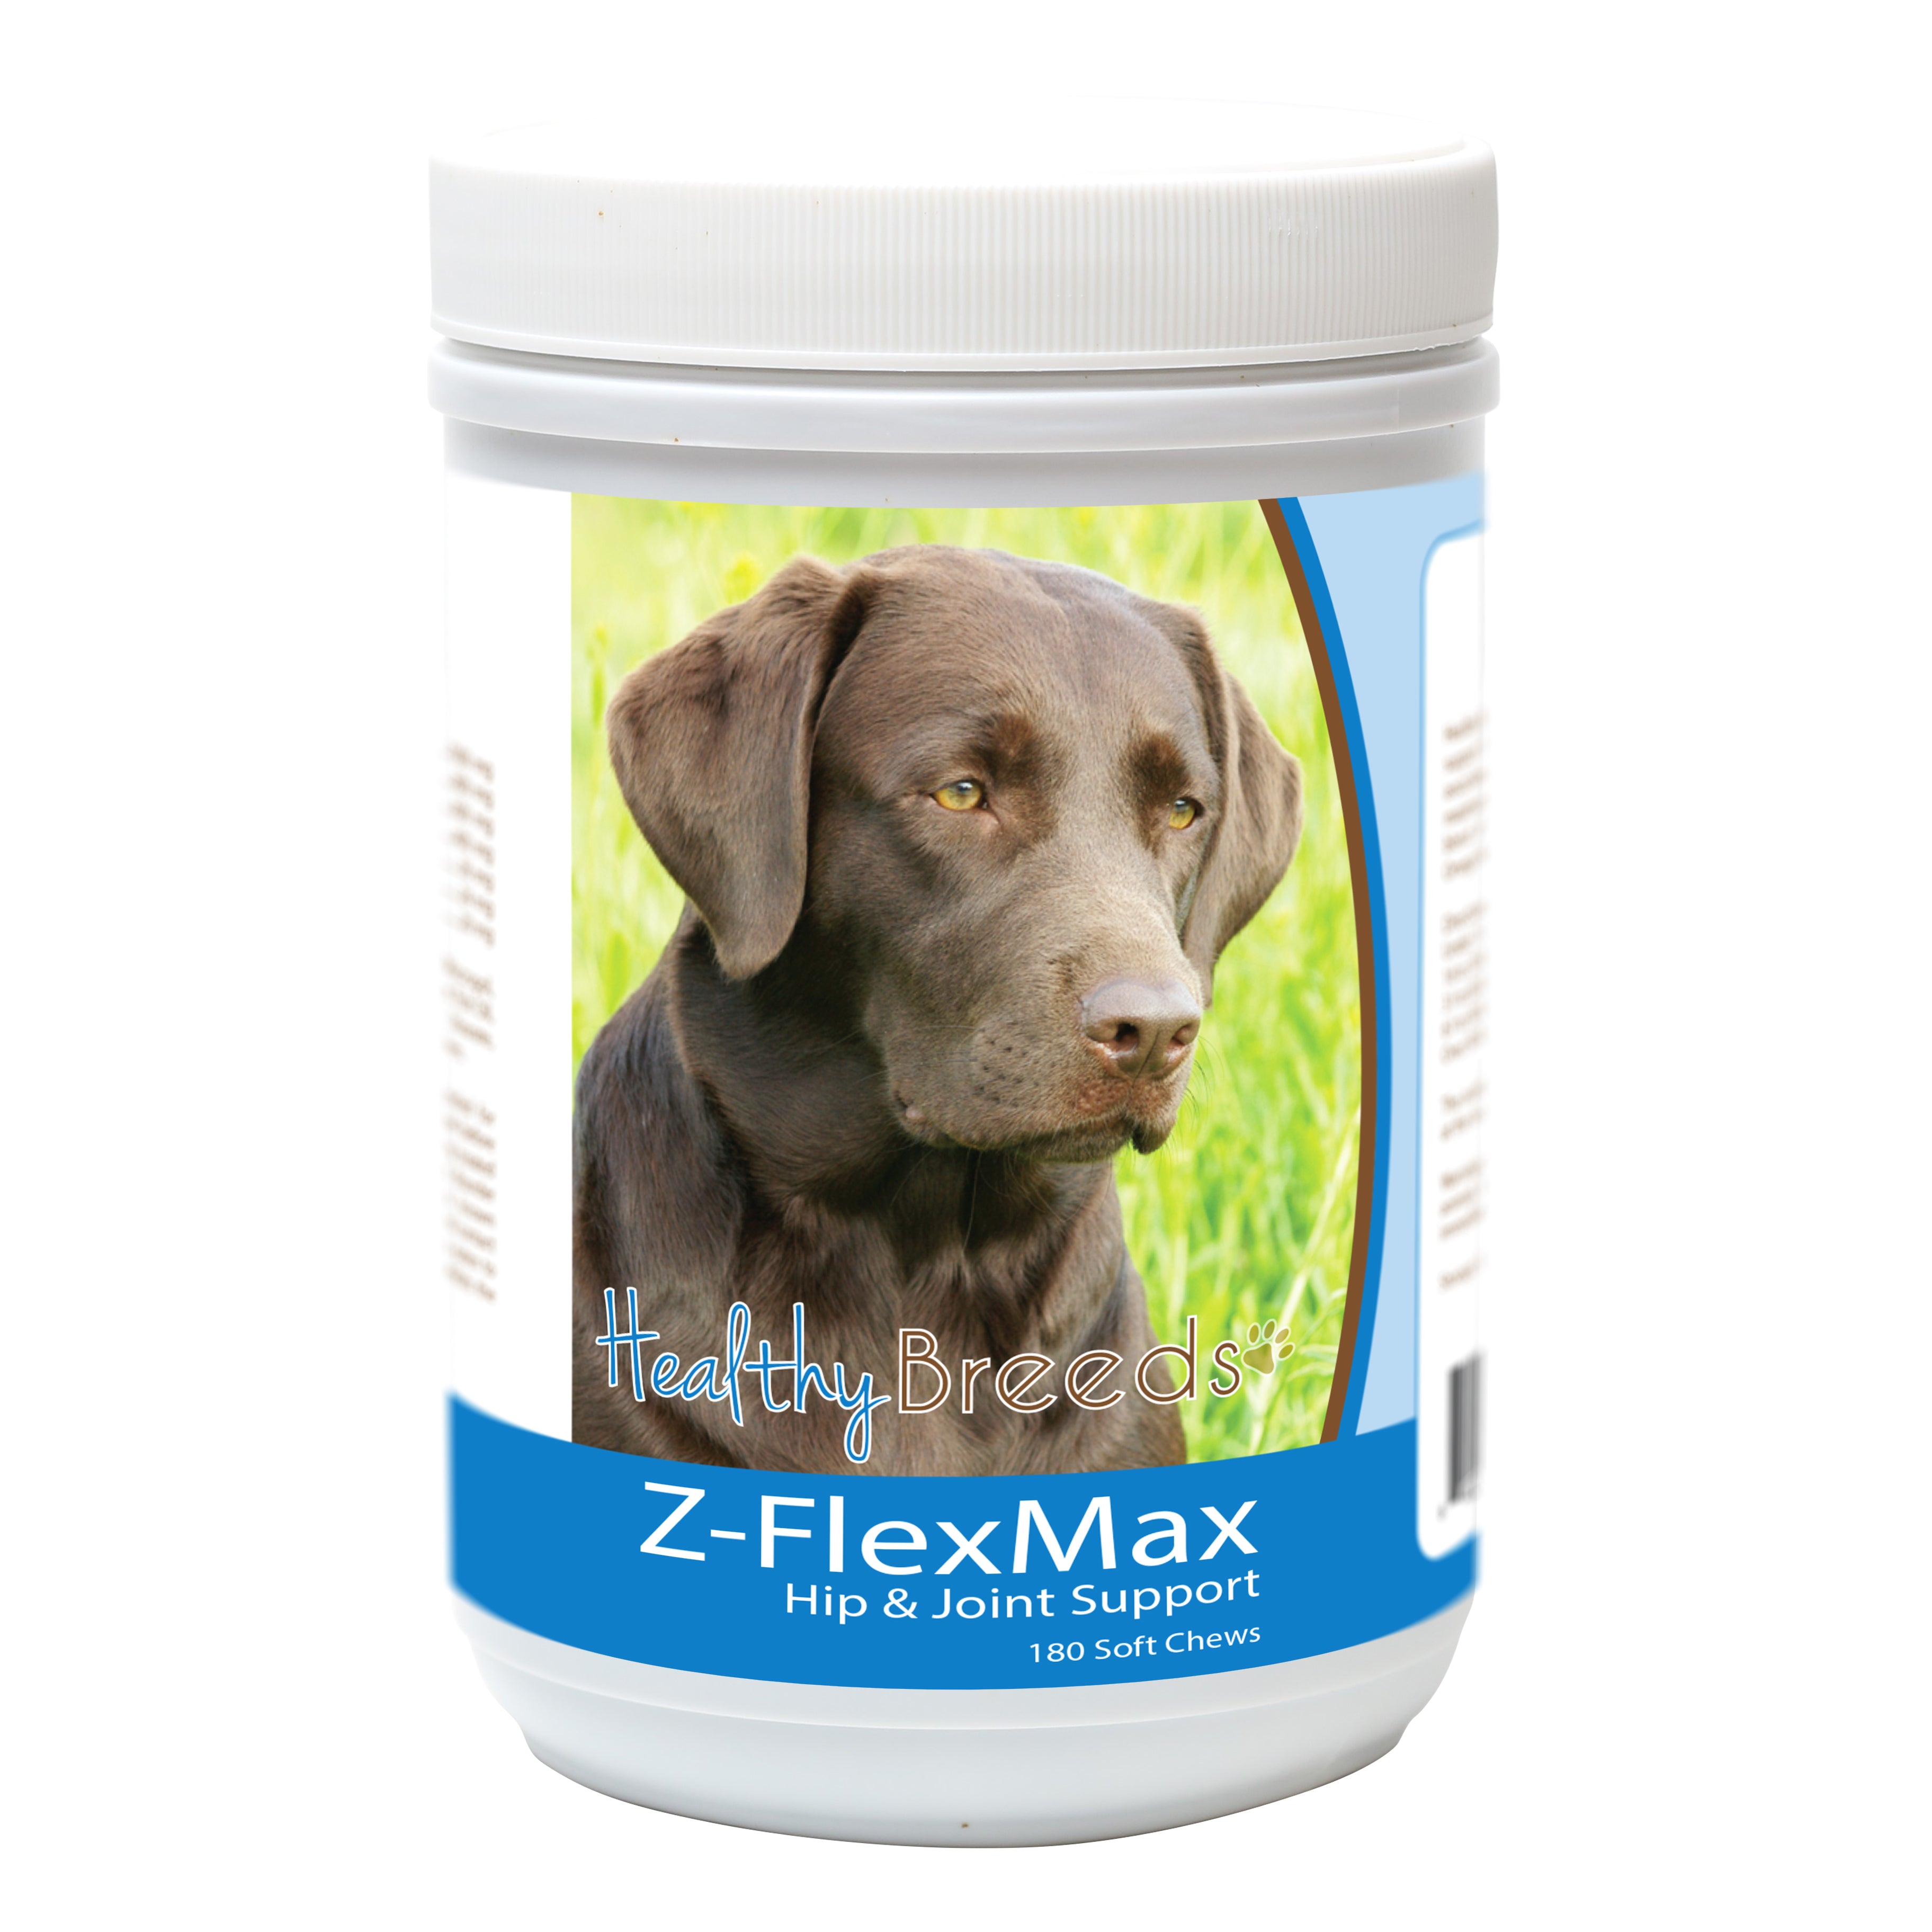 Labrador Retriever Z-Flex Max Dog Hip and Joint Support 180 Count